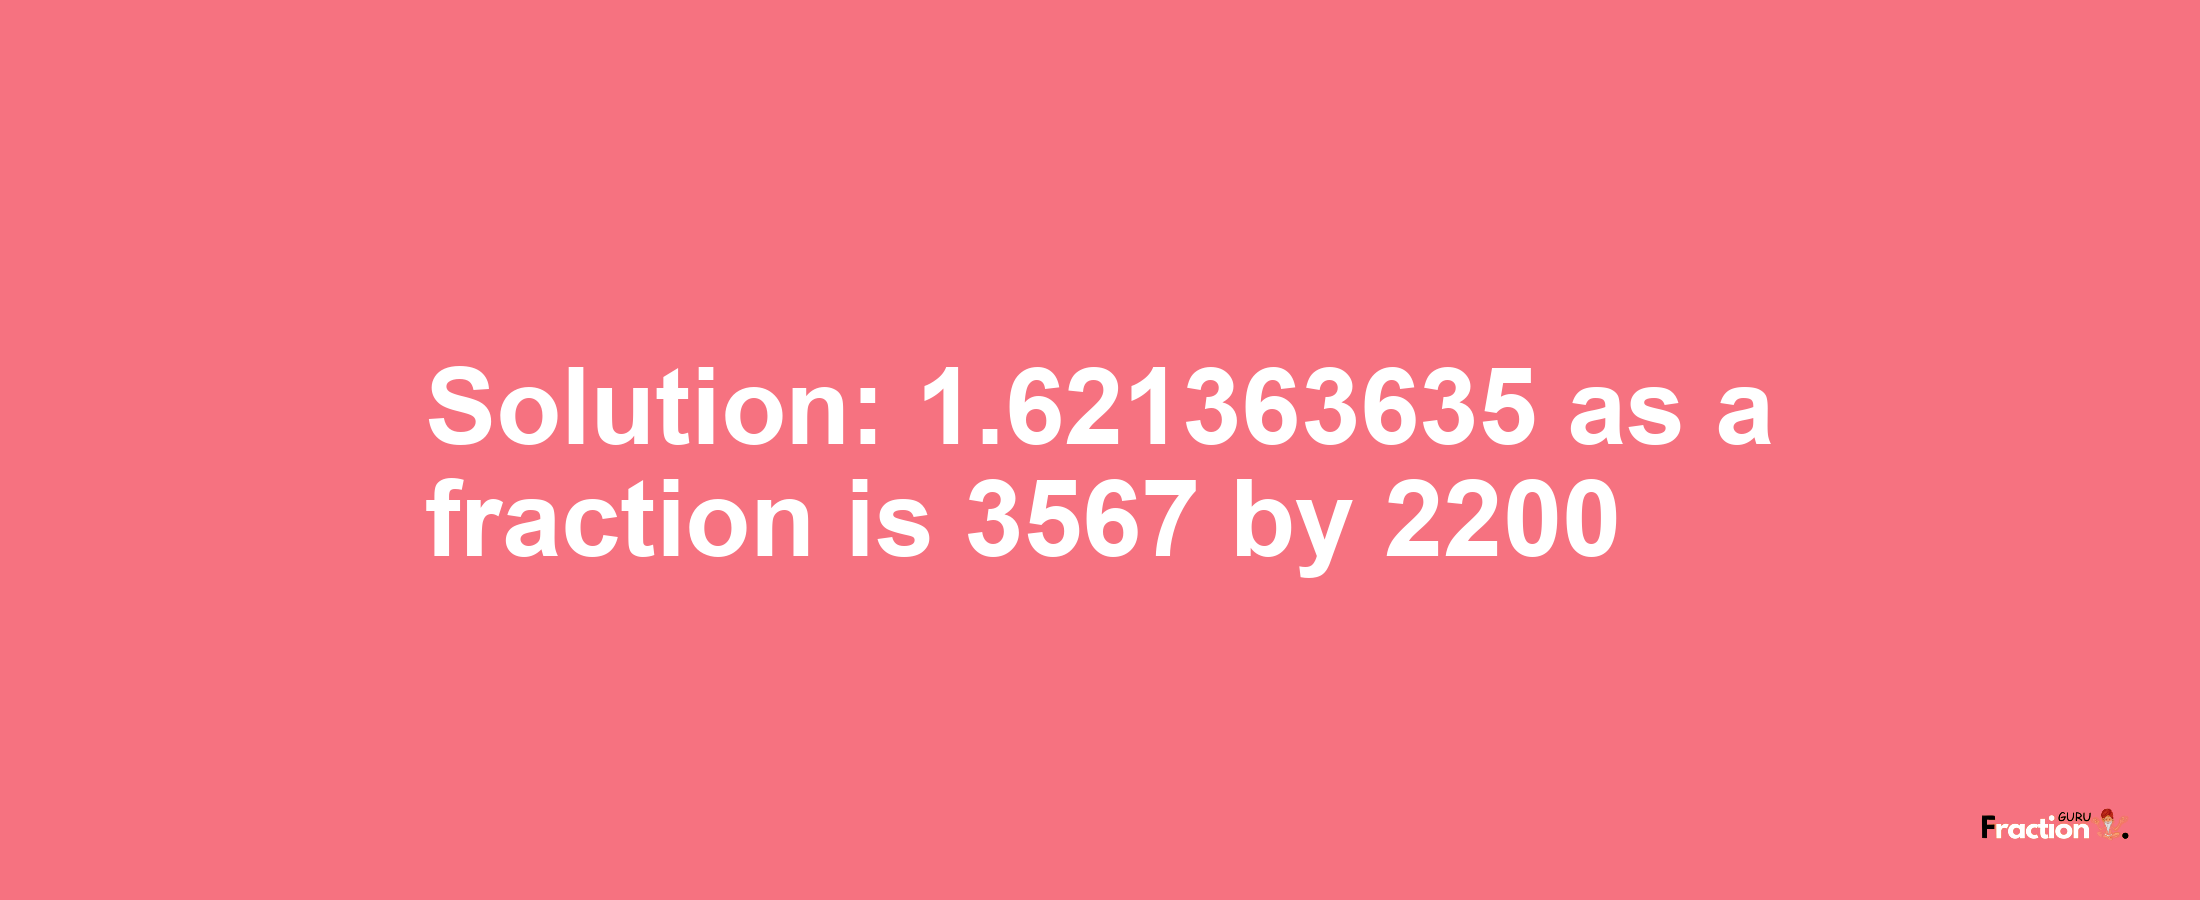 Solution:1.621363635 as a fraction is 3567/2200